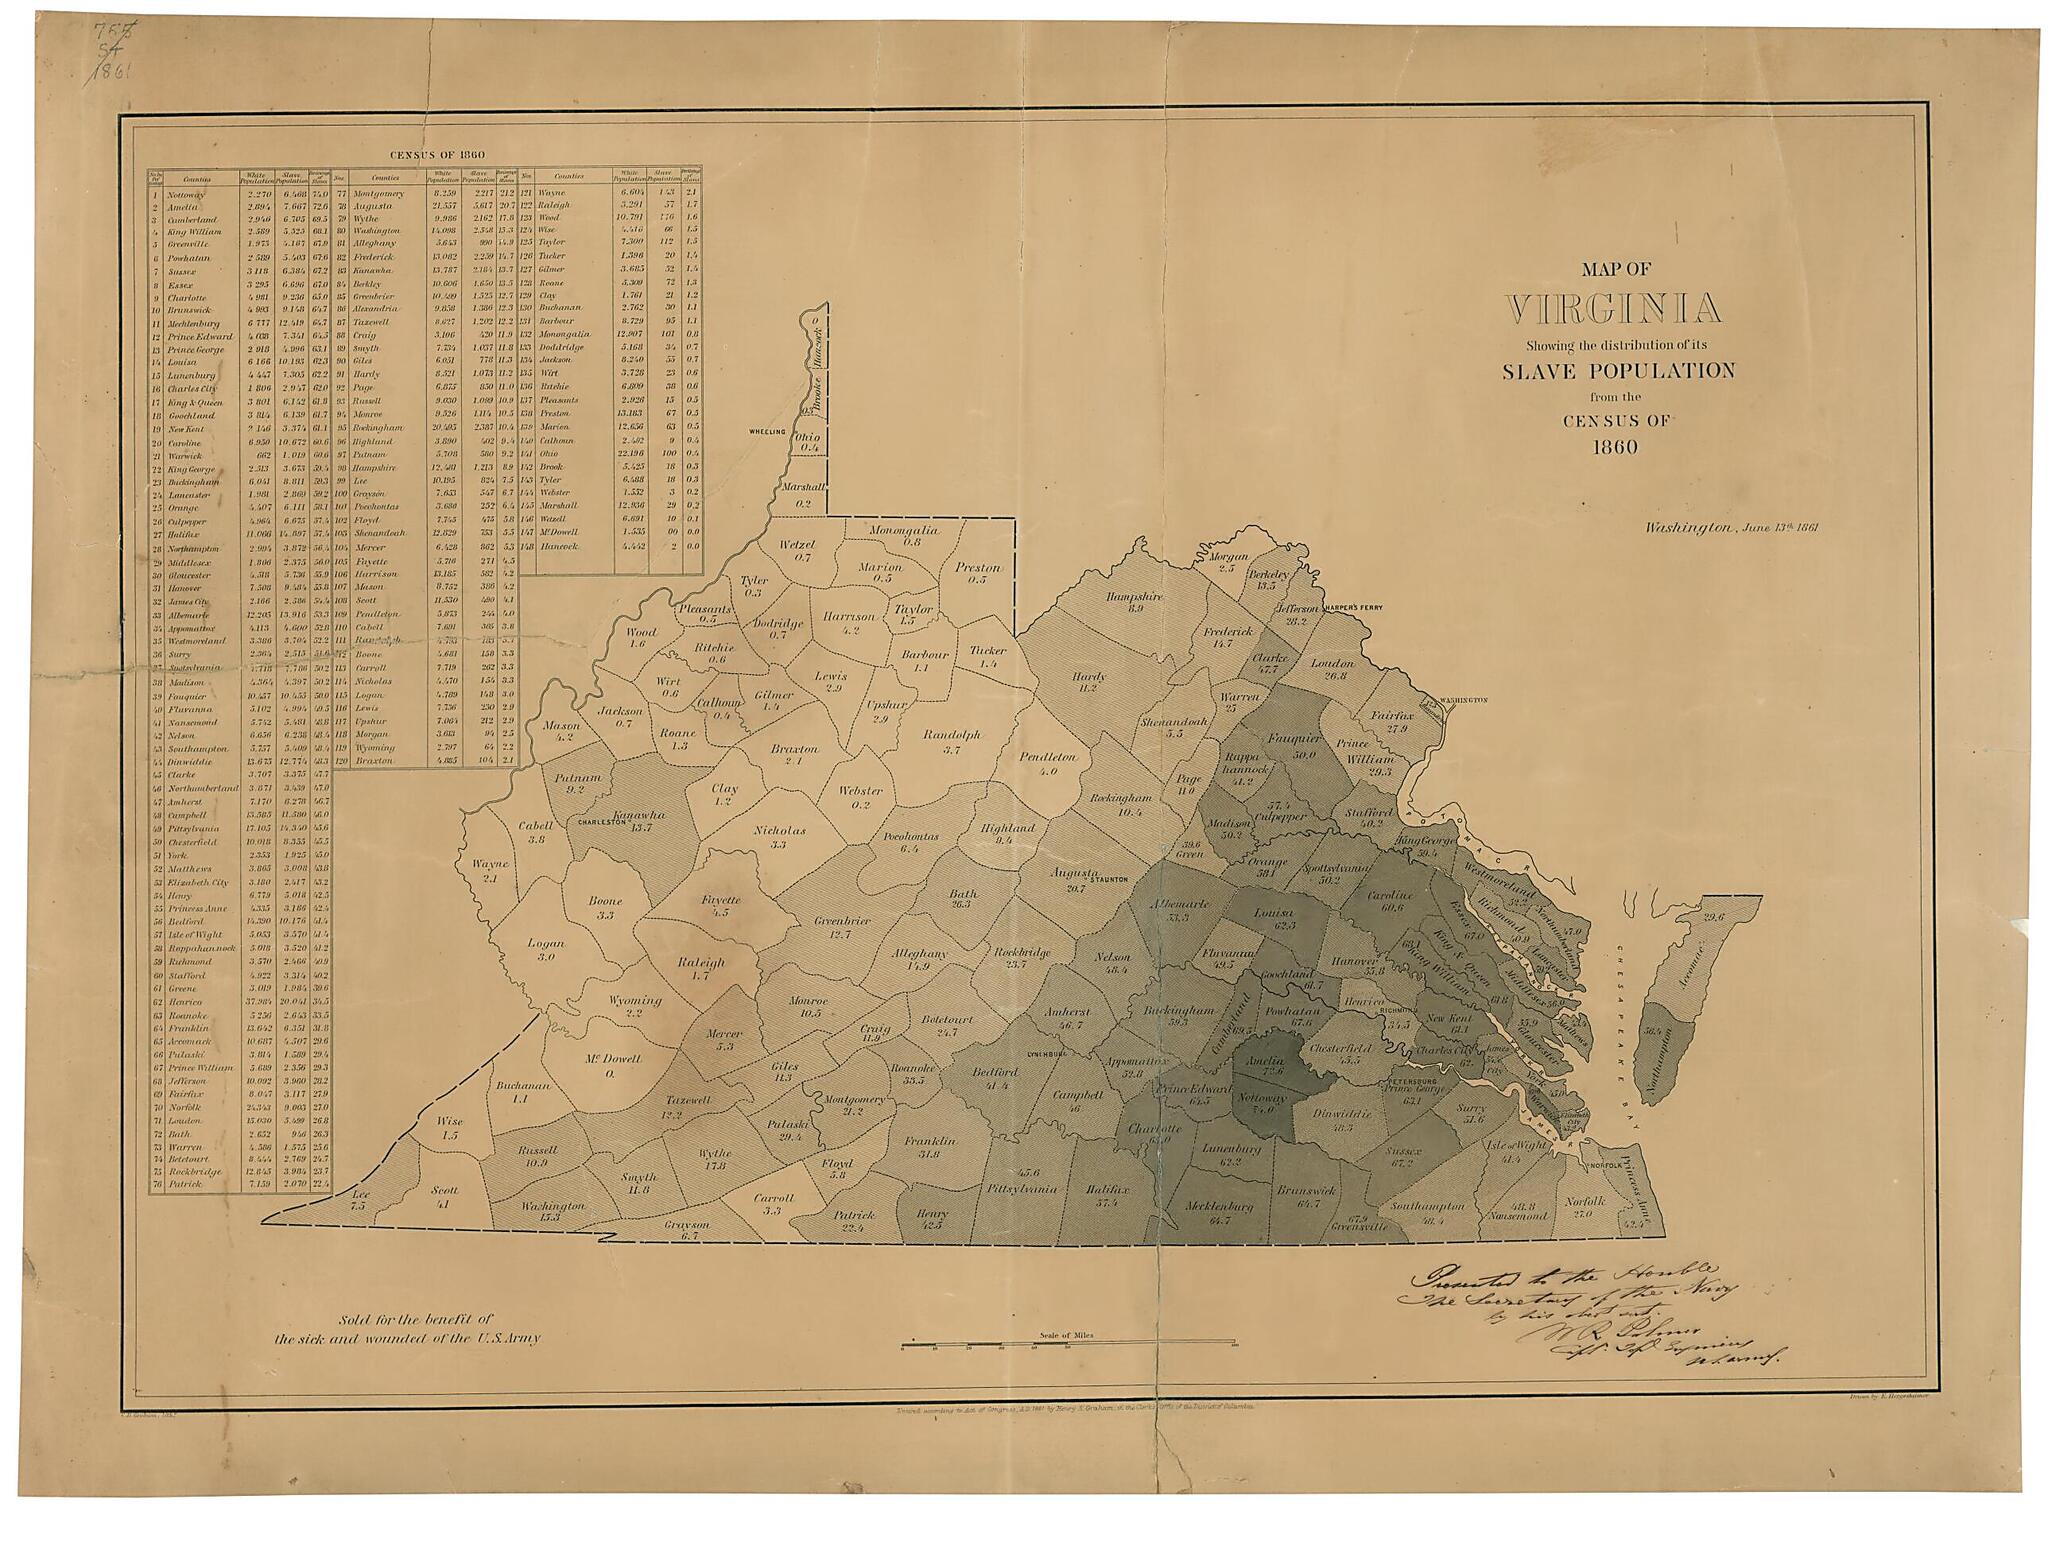 This old map of Map of Virginia : Showing the Distribution of Its Slave Population from the Census of 1860 from 1861 was created by C. B. (Curtis B.) Graham, Henry S. Graham, E. (Edwin) Hergesheimer in 1861